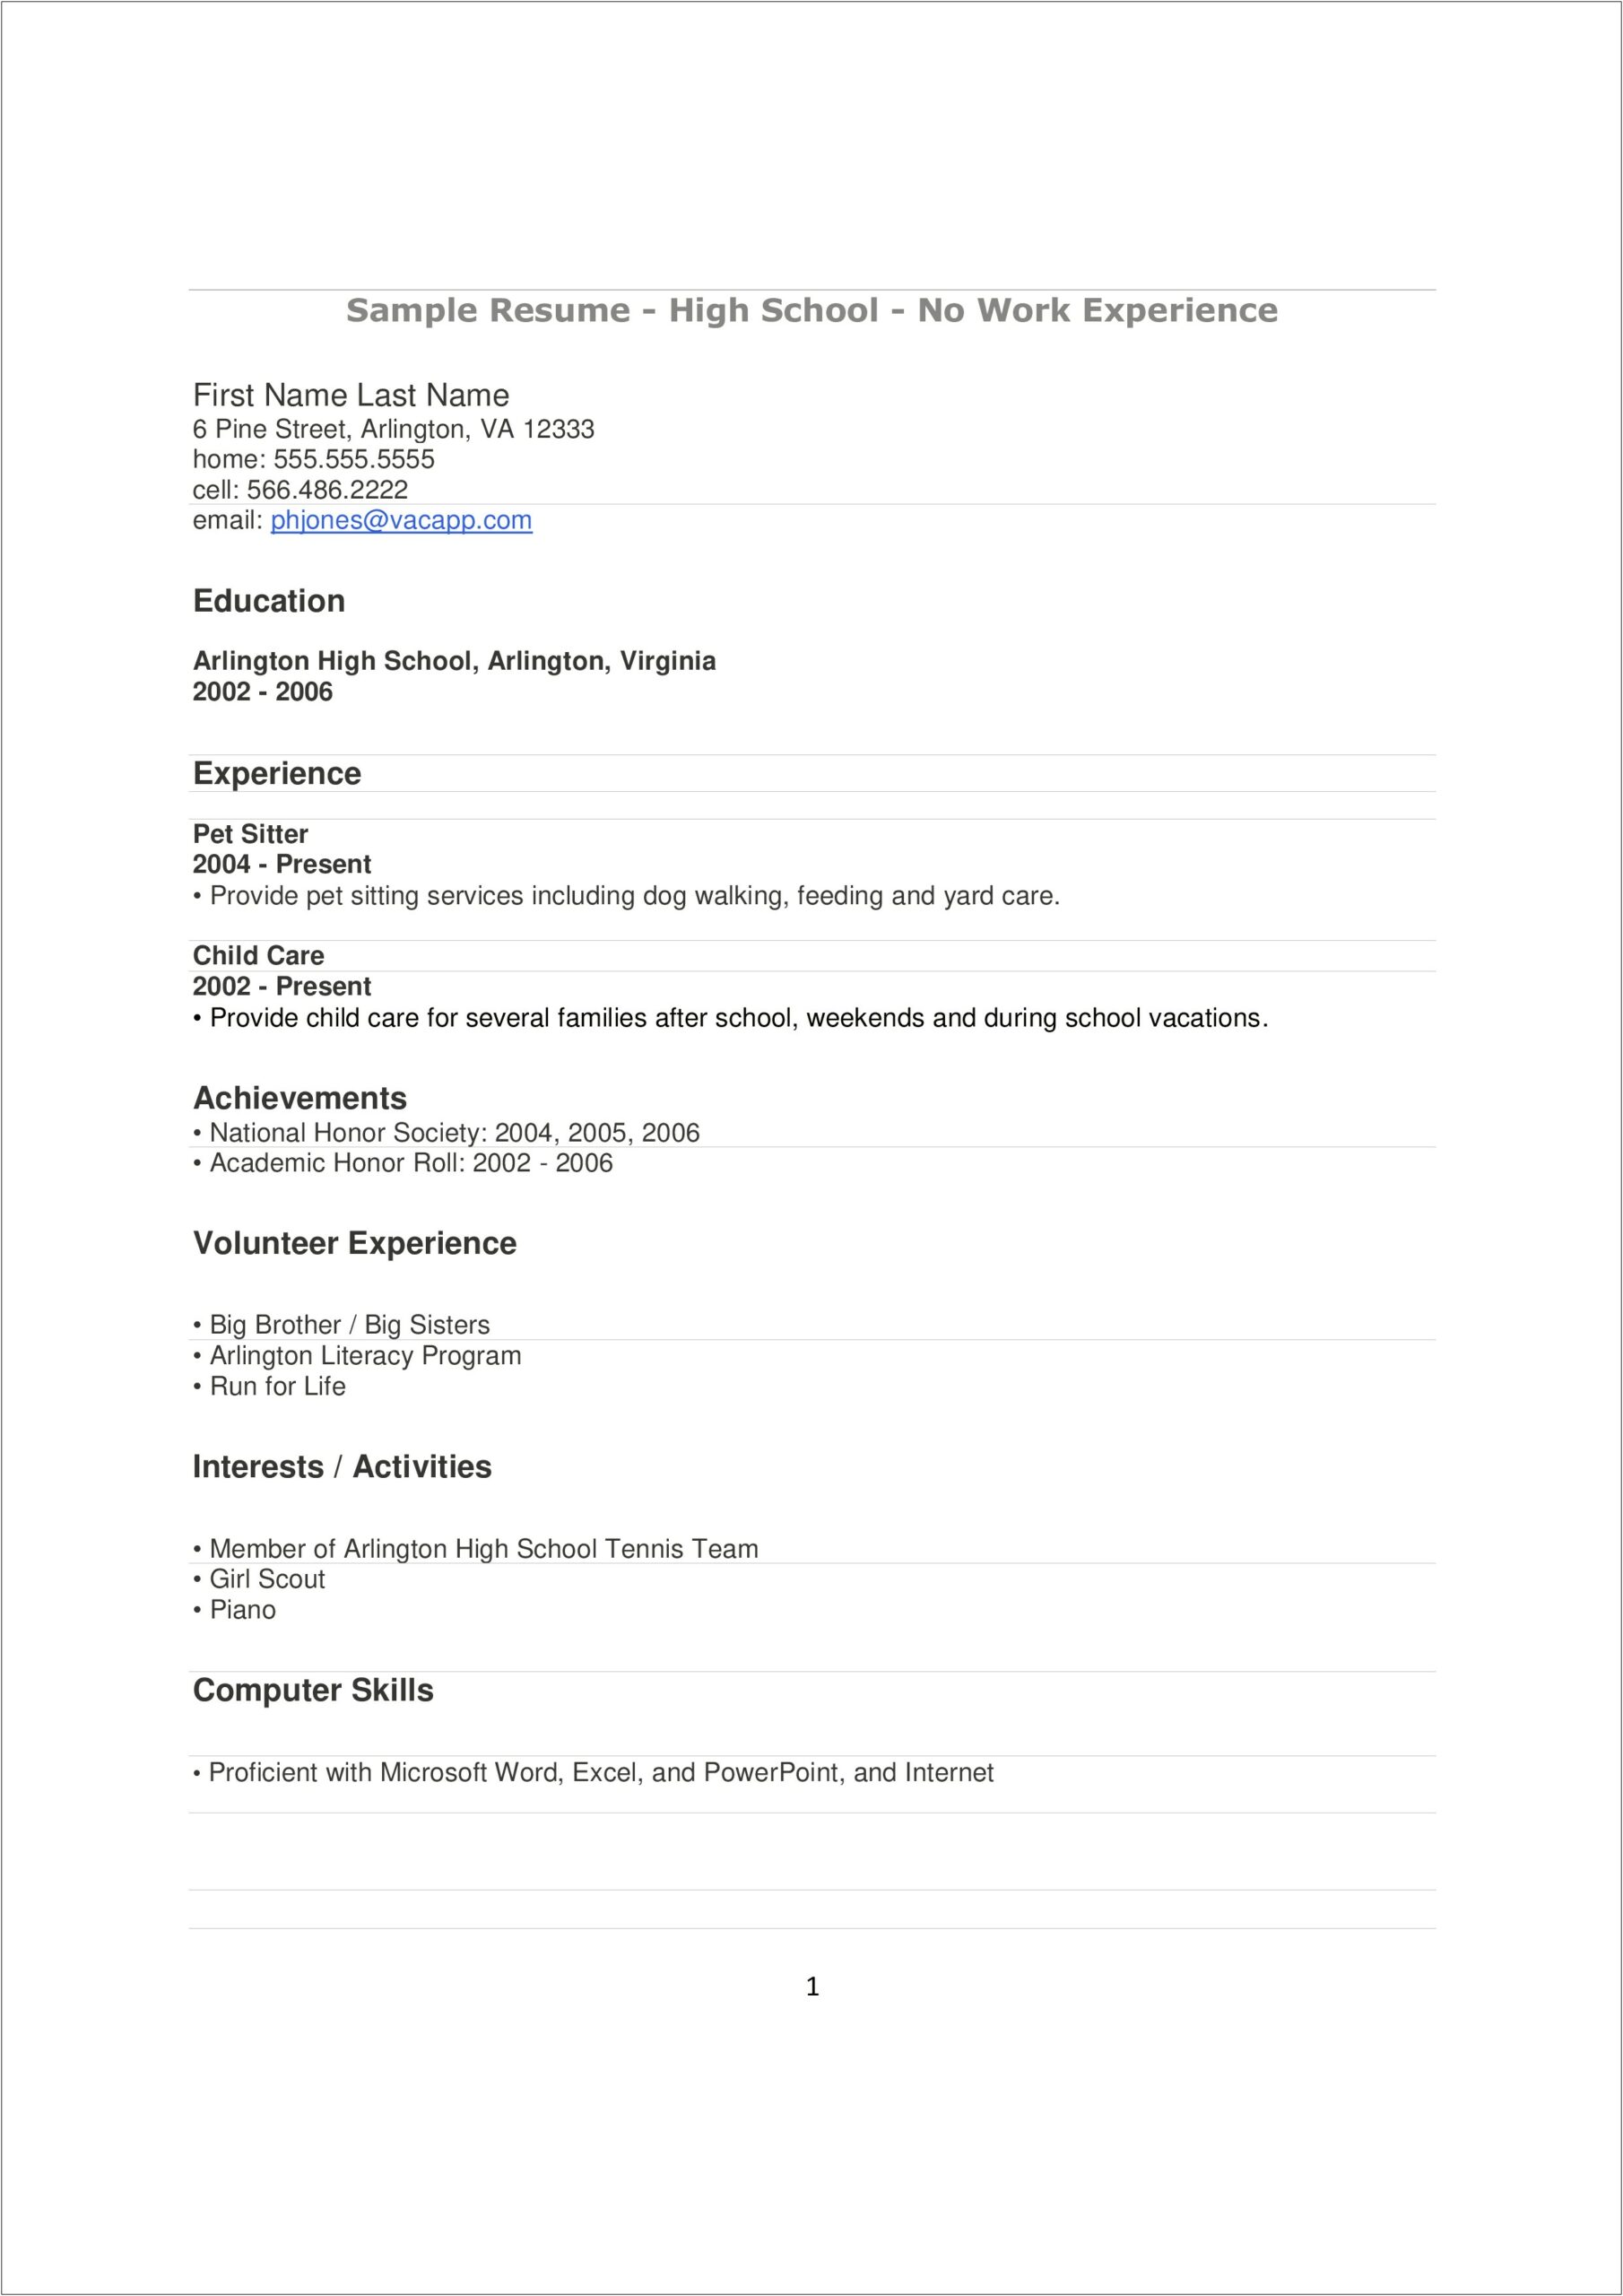 Resume Format With No Job Experience